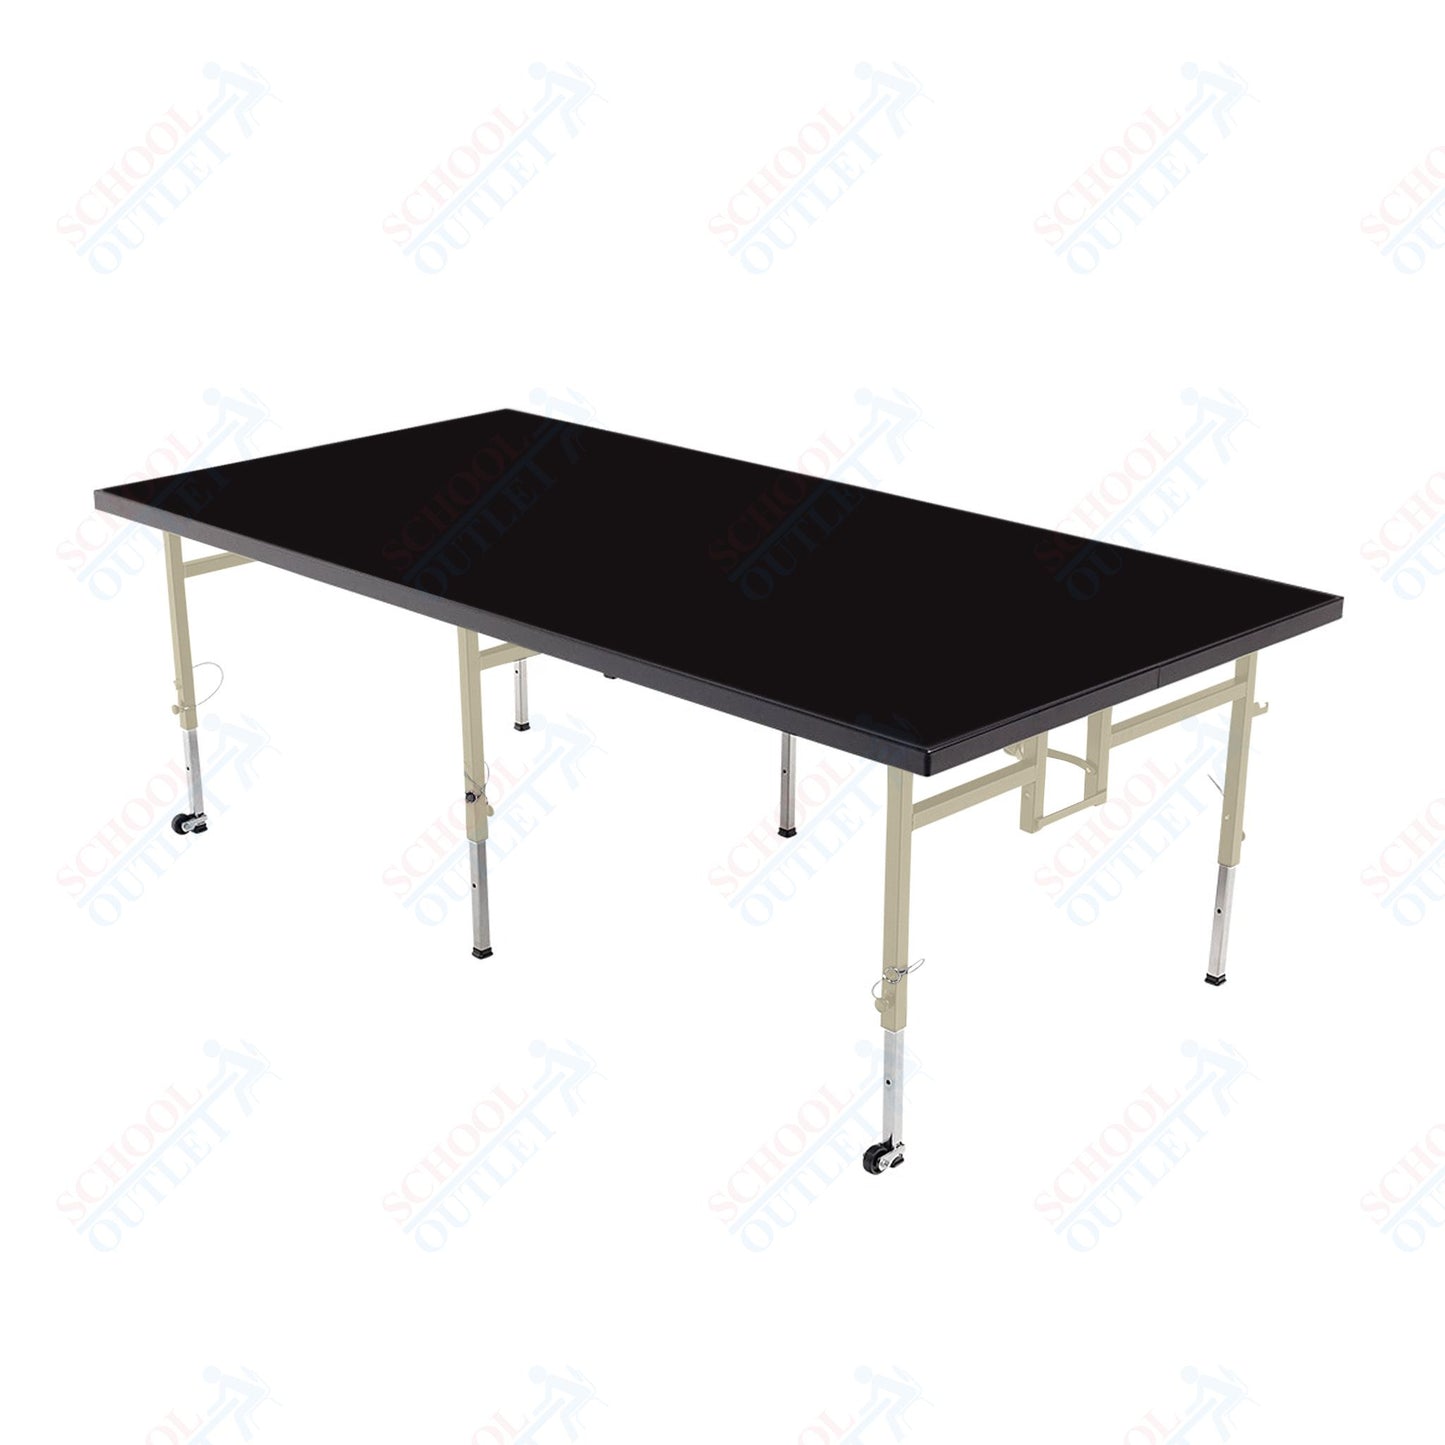 AmTab Adjustable Height Stage - Polypropylene Top - 36"W x 48"L x Adjustable 24" to 32"H  (AmTab AMT-STA3424P)